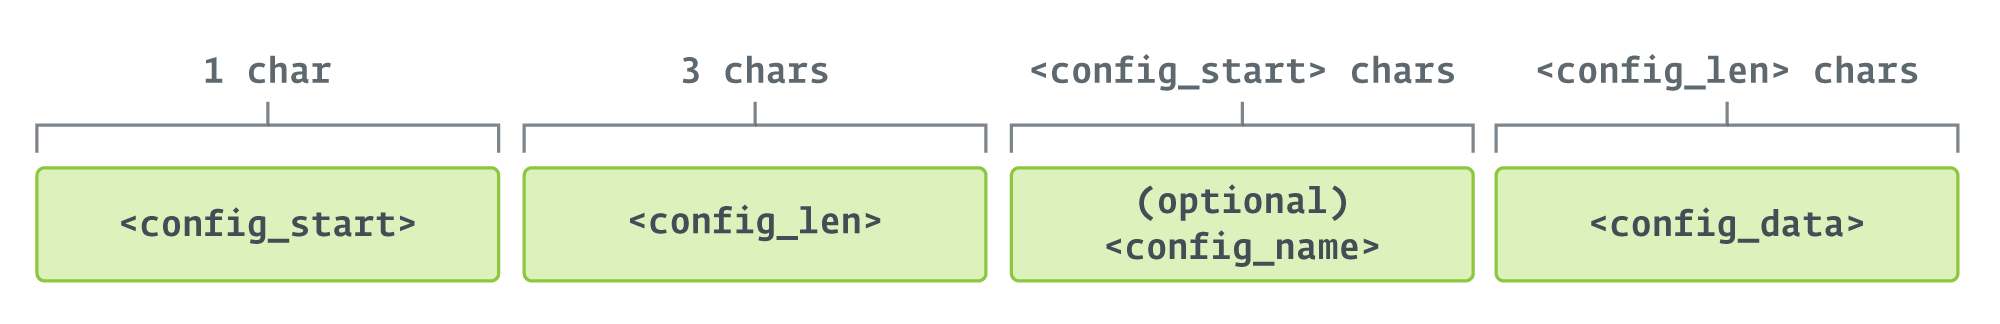 Figure 3. Format of configuration fields in config.txt